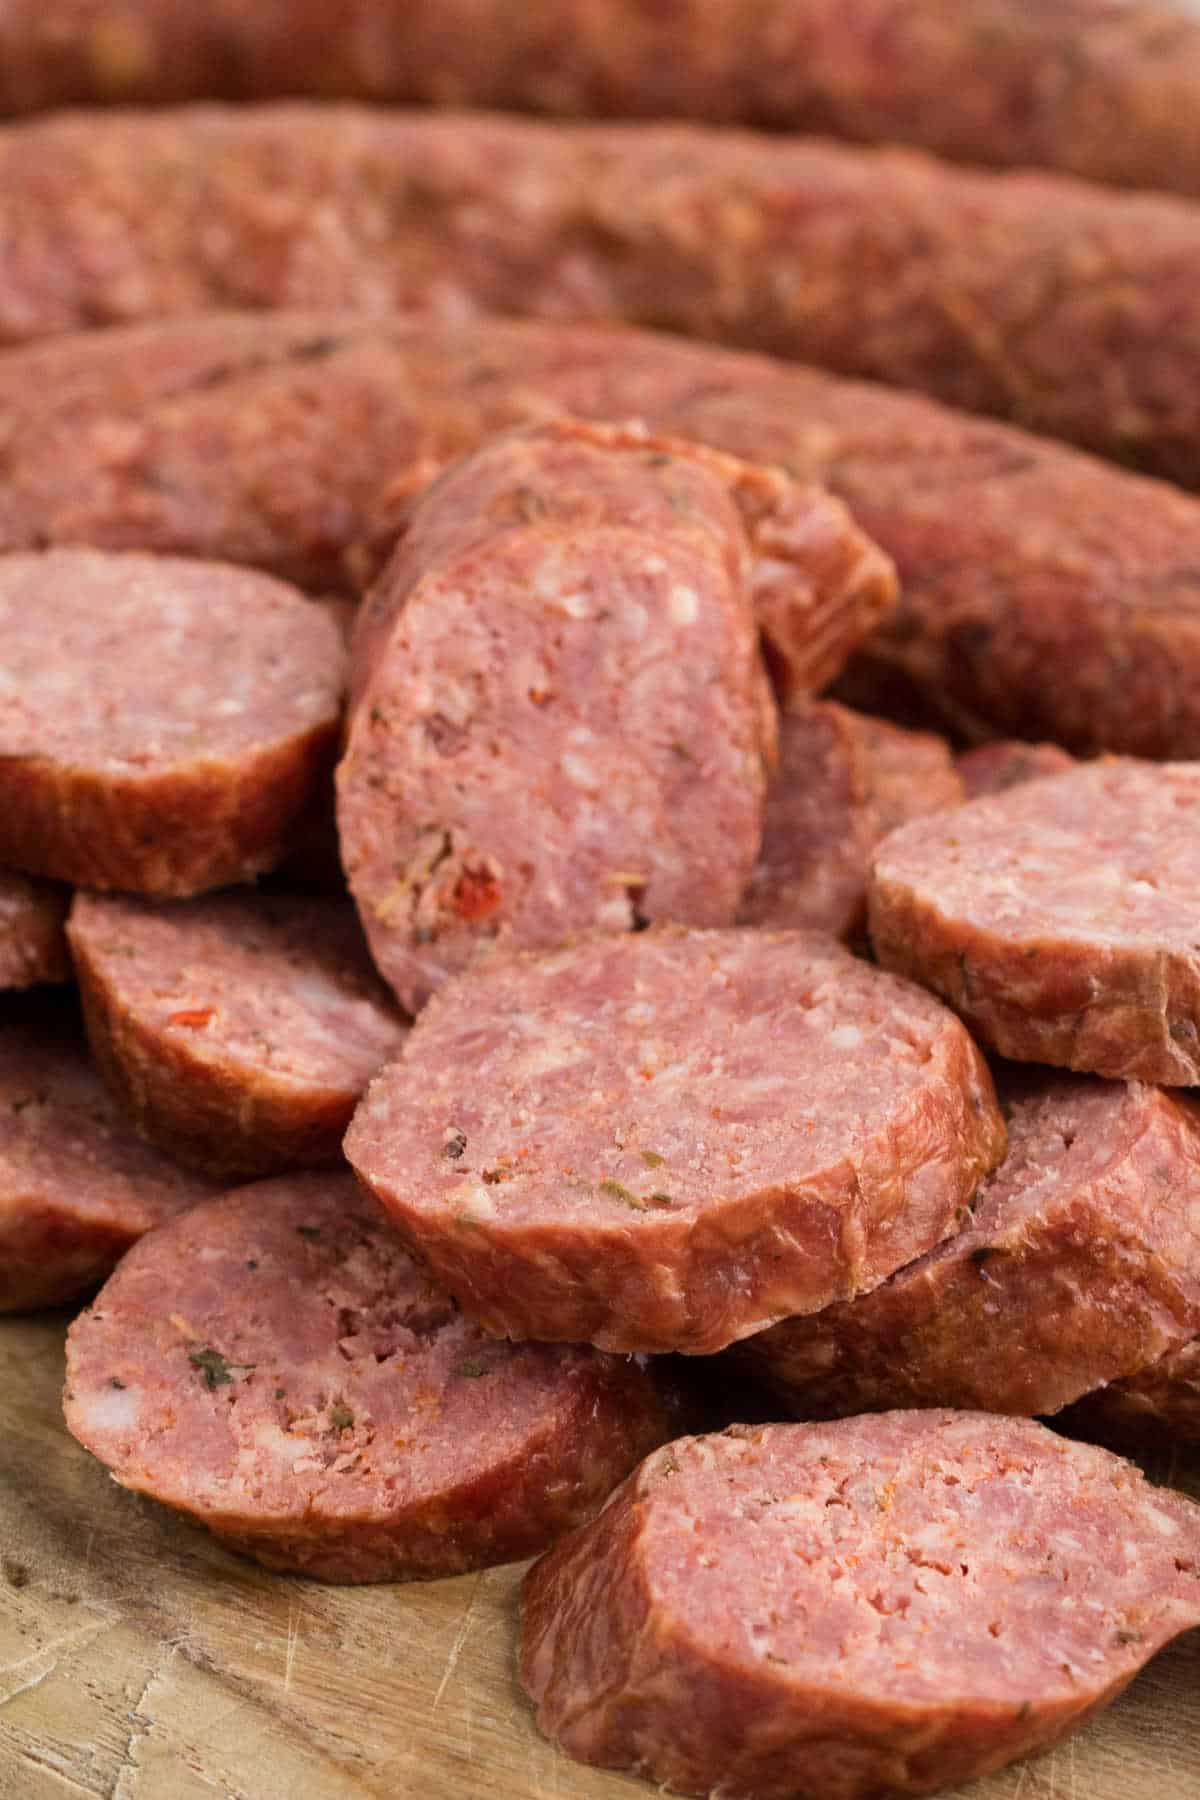 A very close up image of some sliced andouille sausage.